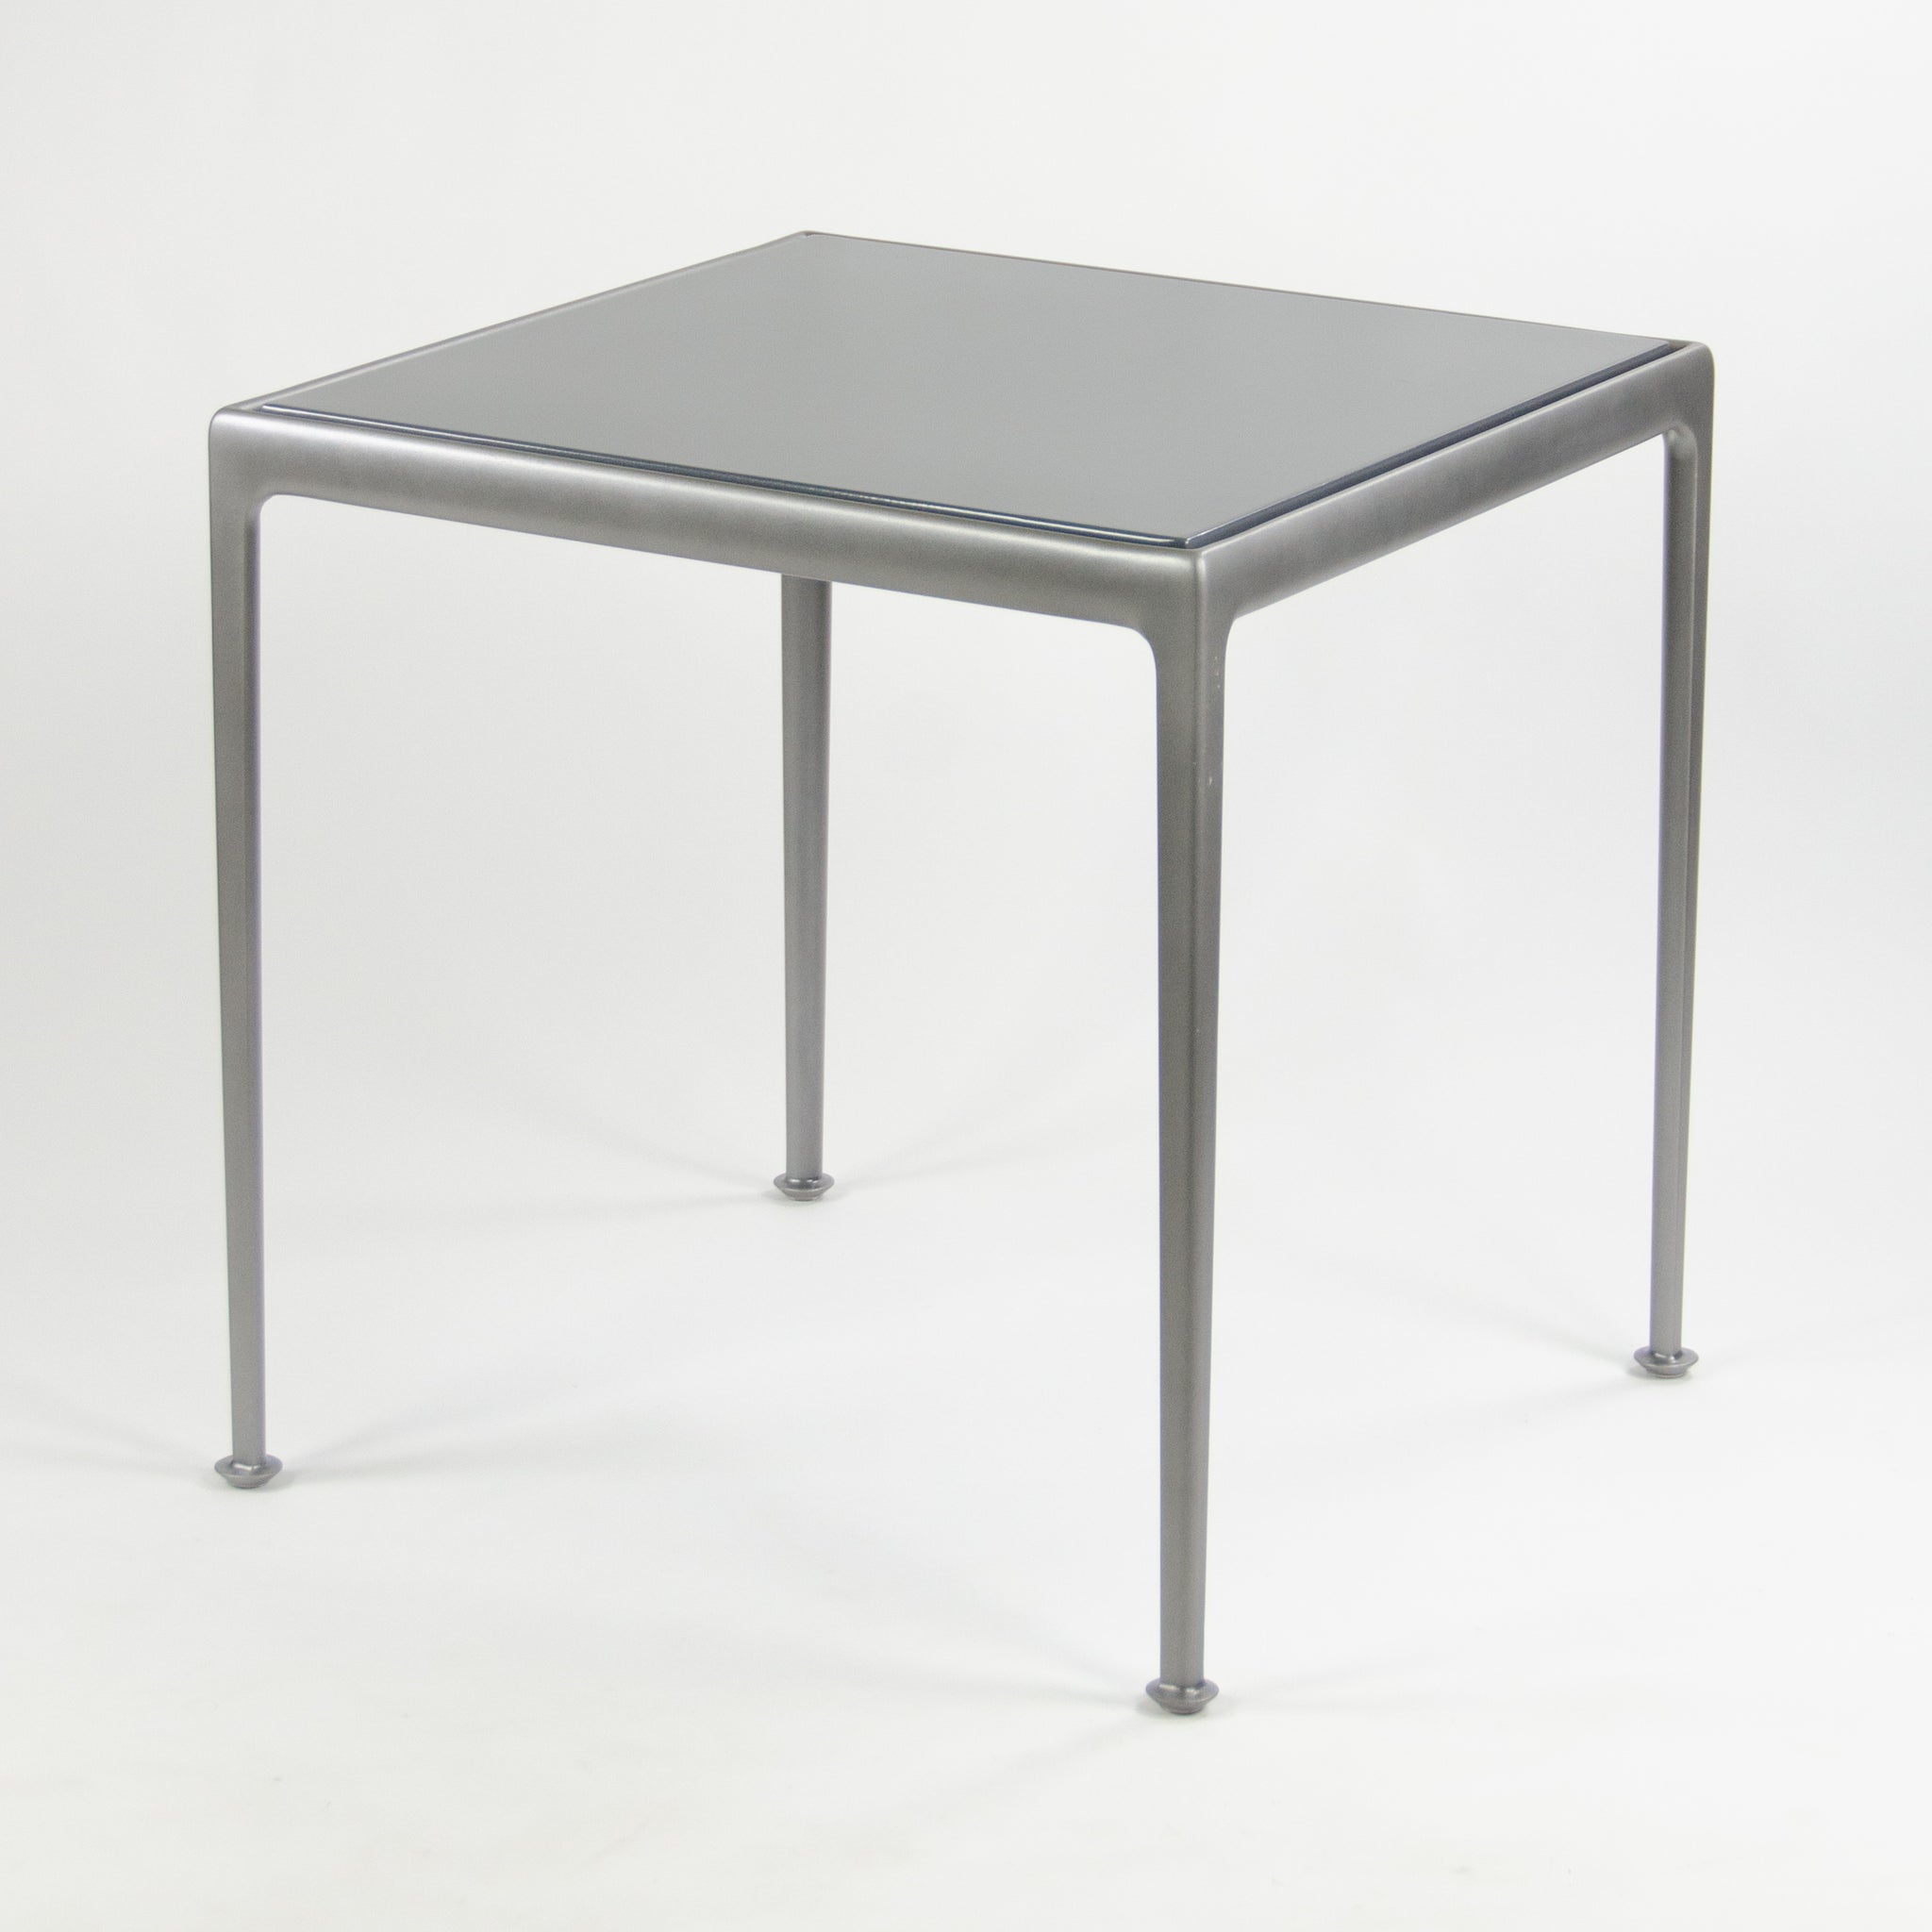 SOLD Richard Schultz for Knoll 1966 Dining Table 1x Available 28x28 Gray